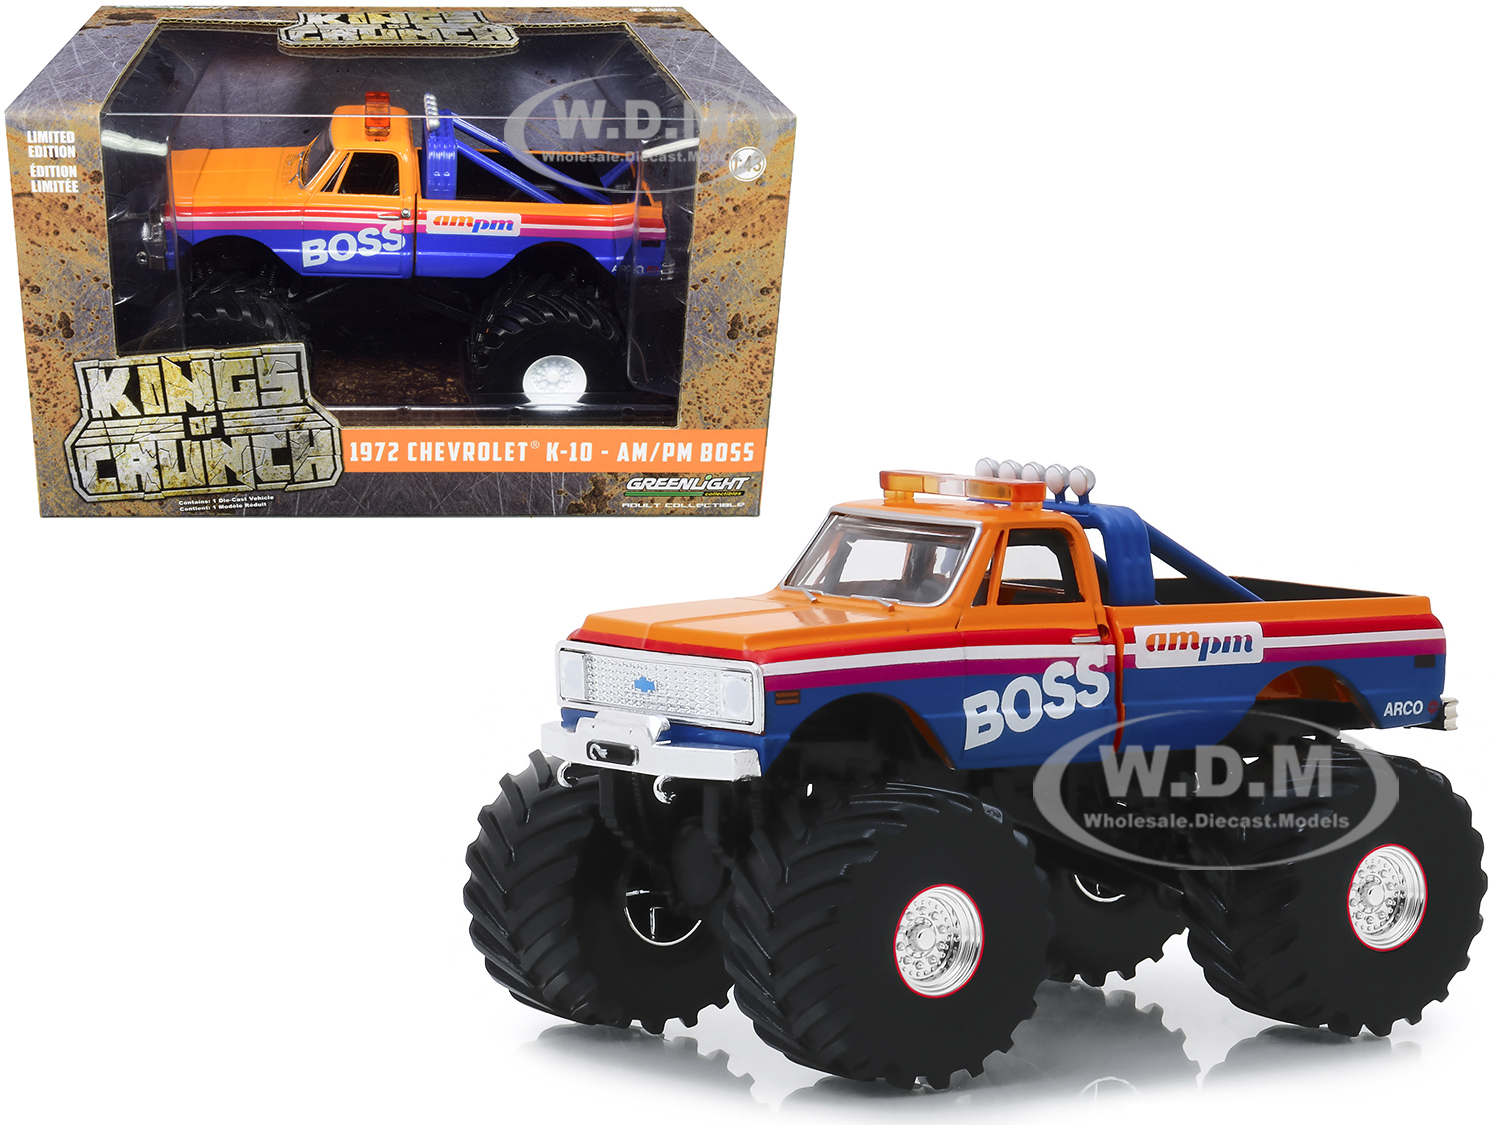 1972 Chevrolet K-10 Monster Truck With 66-inch Tires "am/pm Boss" 1/43 Diecast Model Car By Greenlight